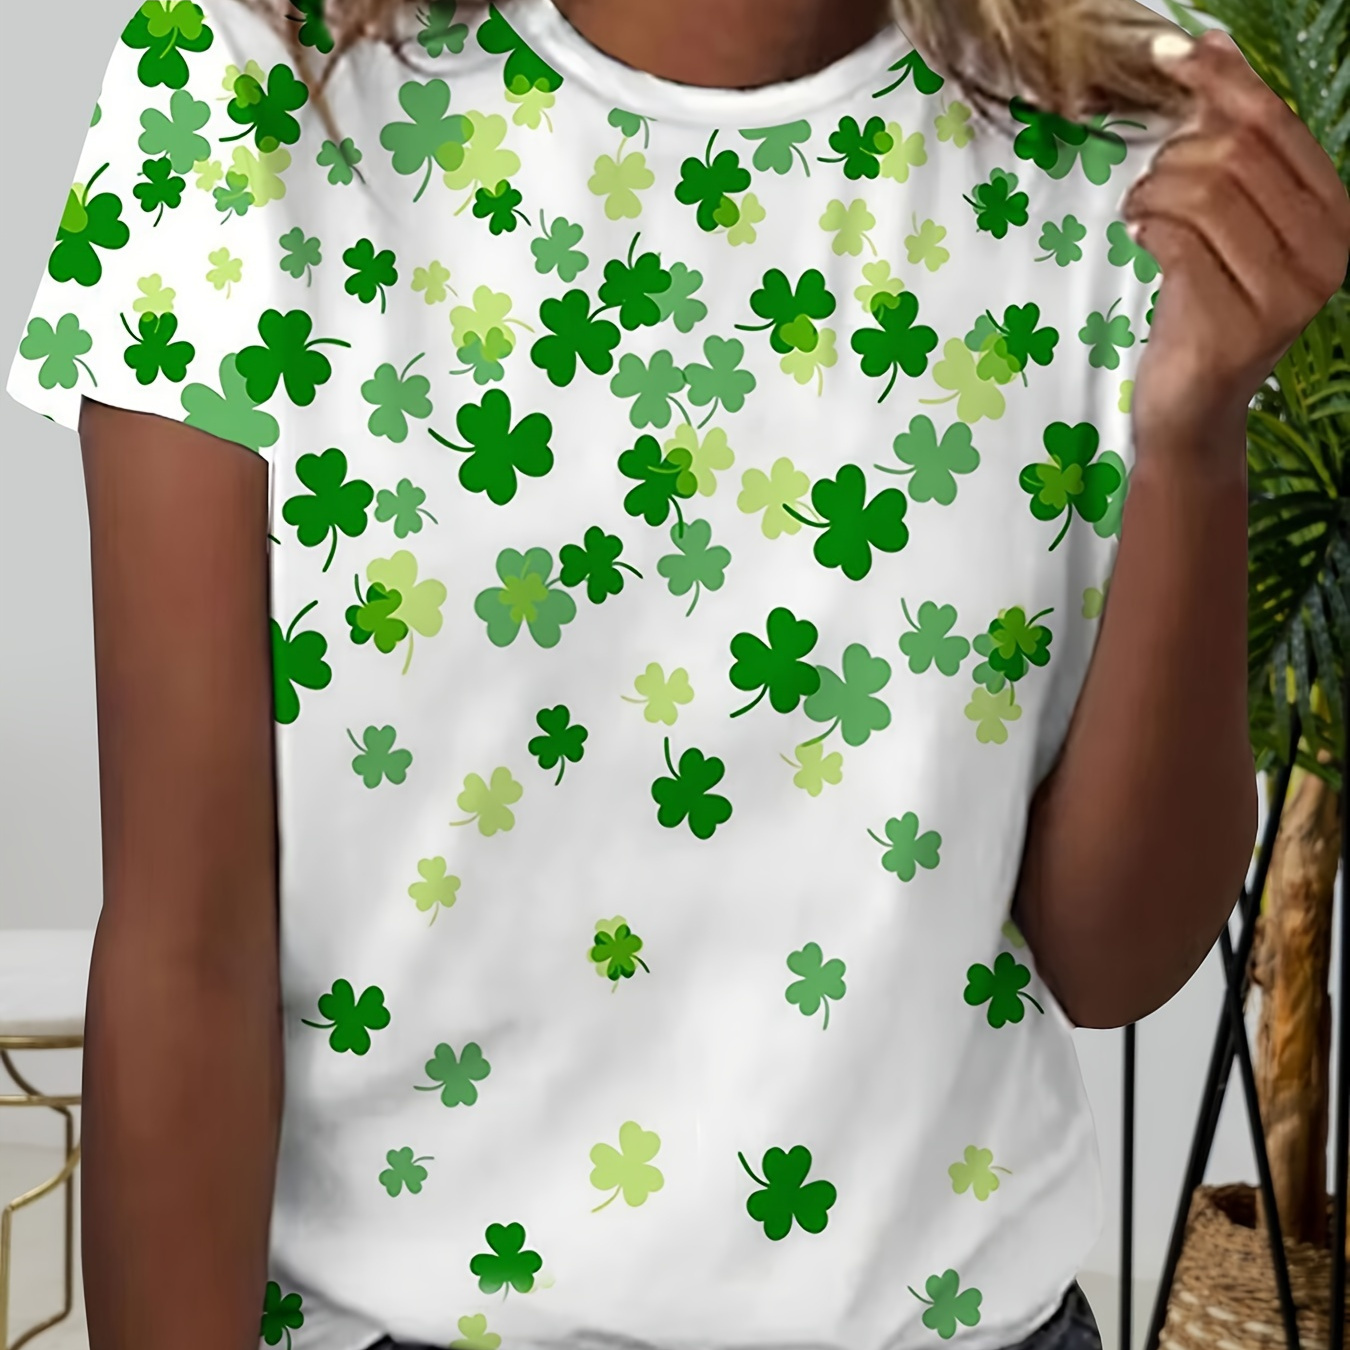 

Clover Print Crew Neck T-shirt, Casual Short Sleeve T-shirt For Spring & Summer, Women's Clothing, St. Patrick's Day